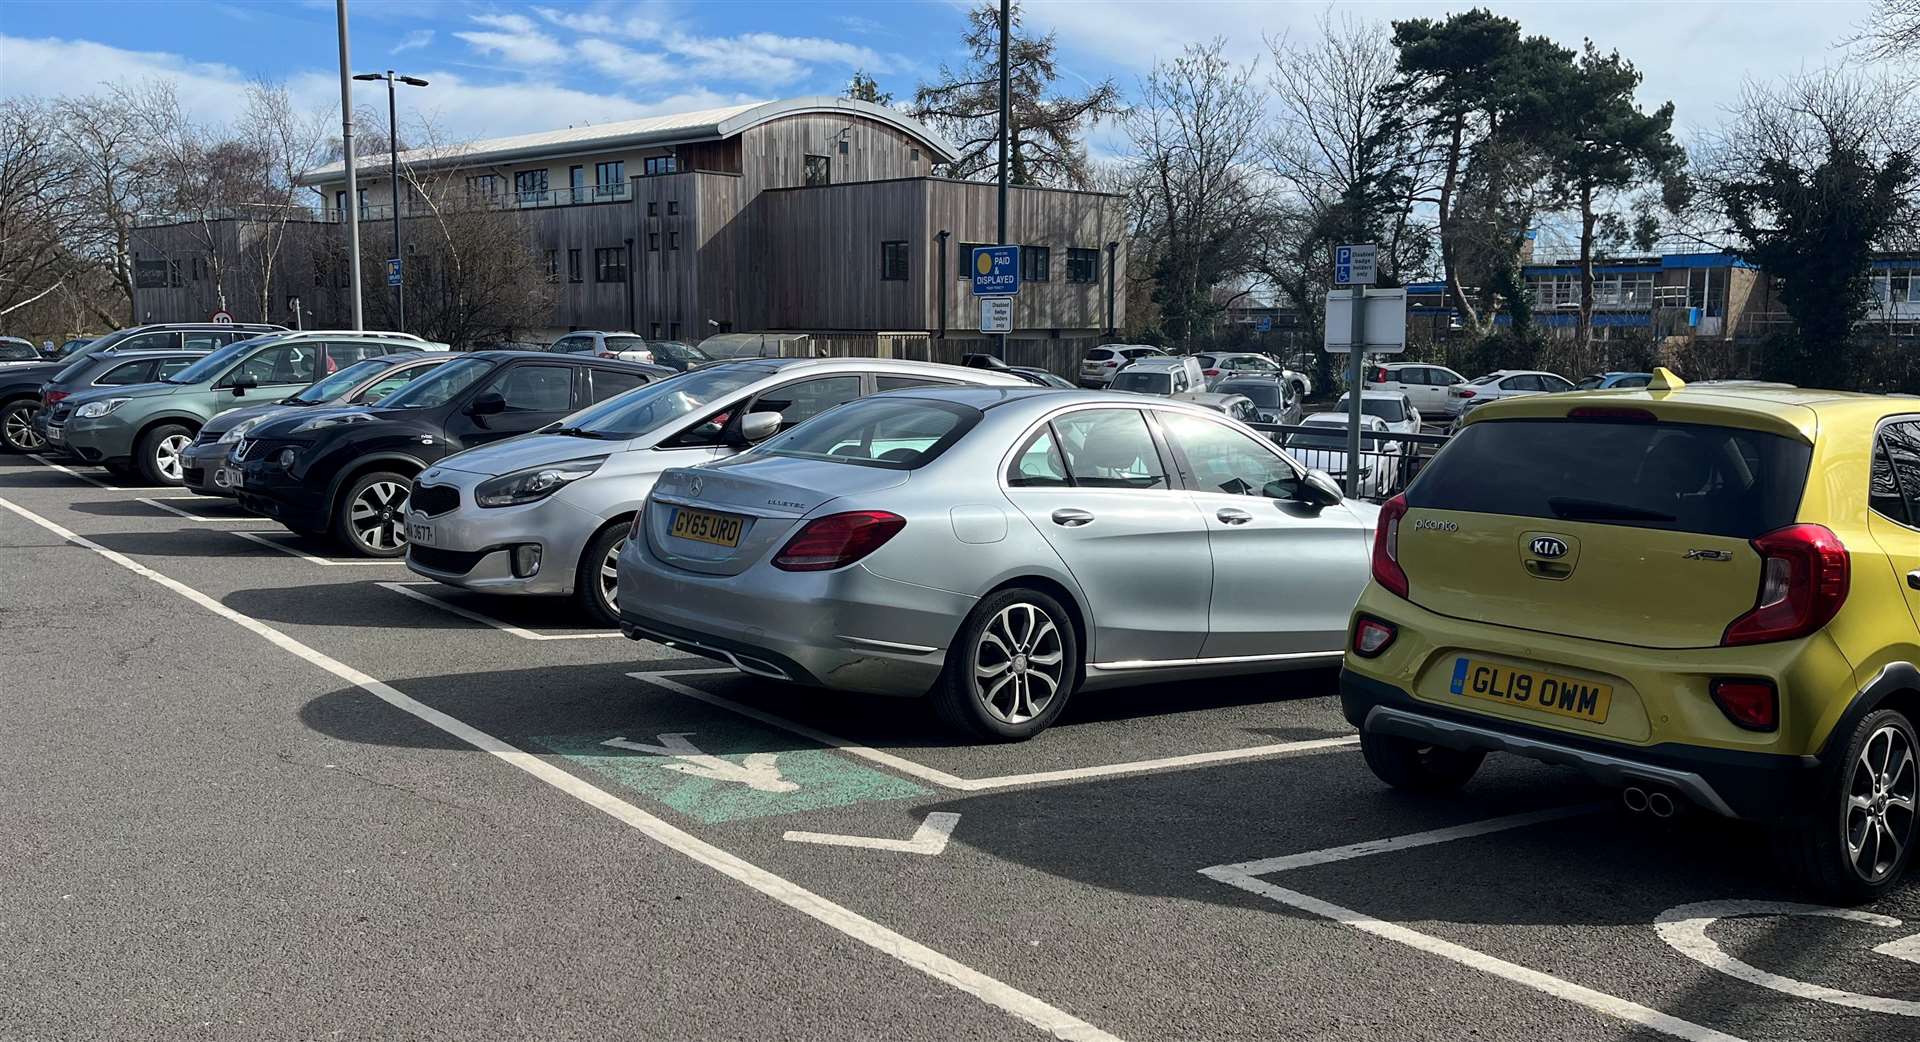 The upper level of the Recreational Ground car park in Tenterden only has a small number of disabled spaces which some shoppers find hard to access